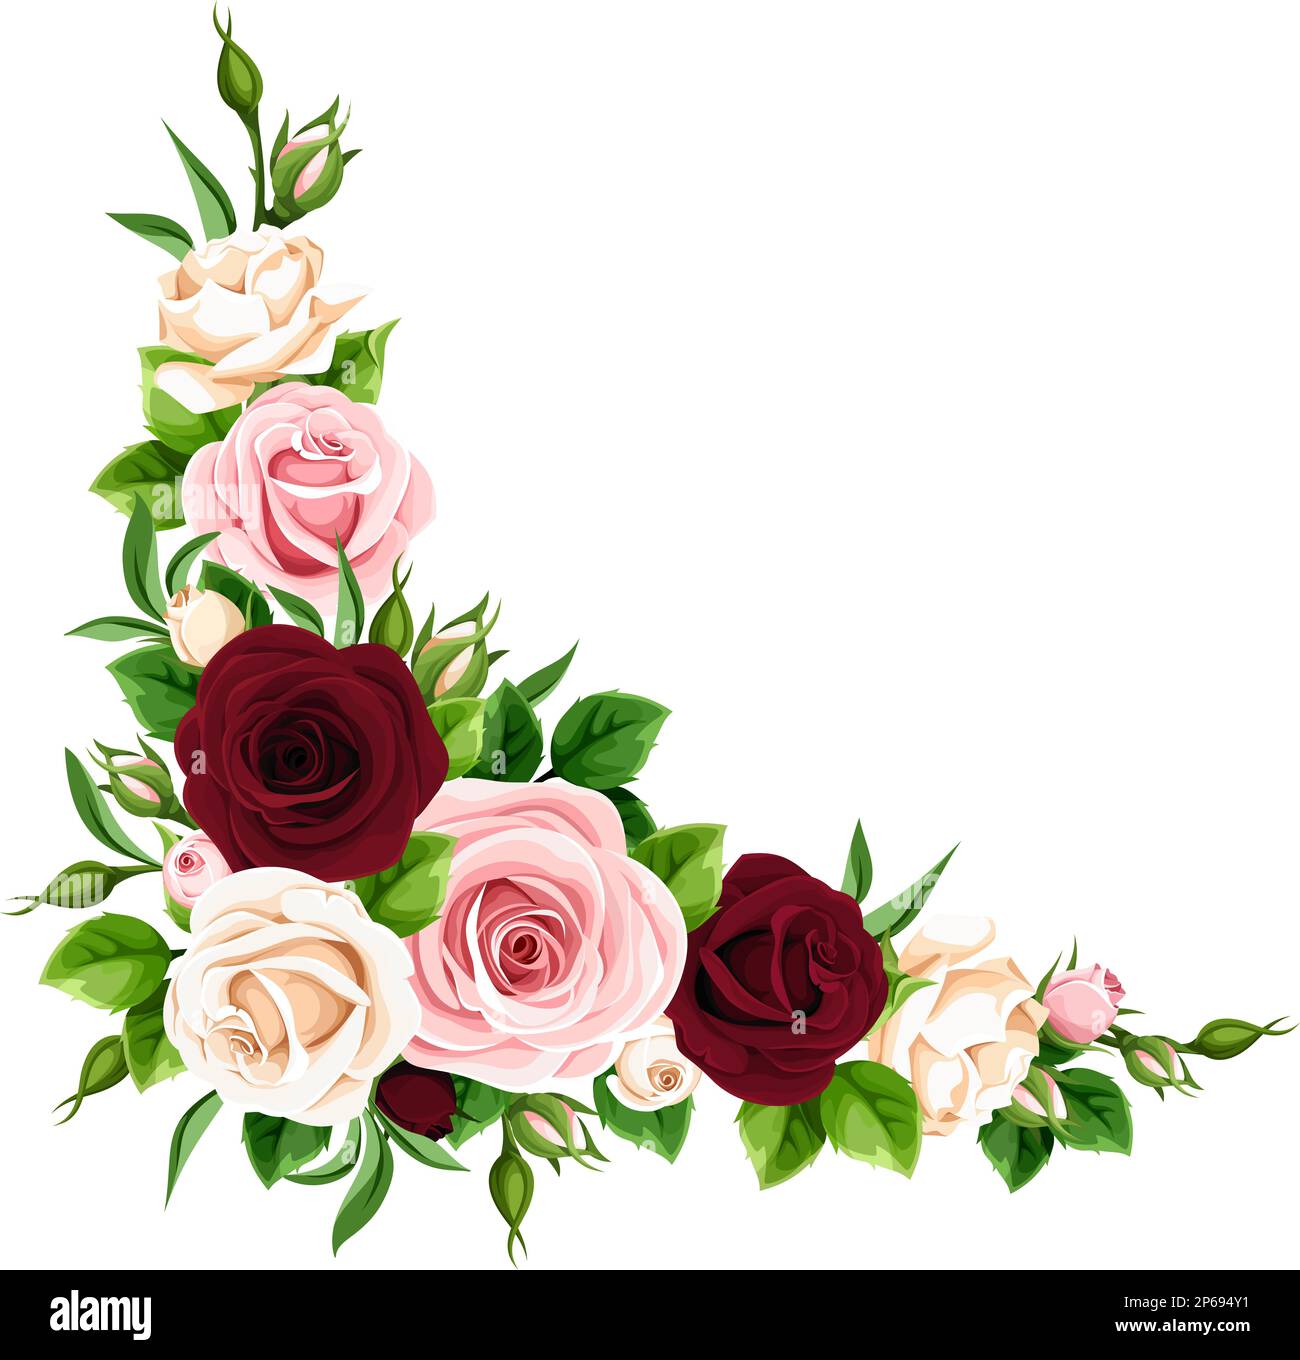 Corner border with pink, burgundy, and white rose flowers on a white ...